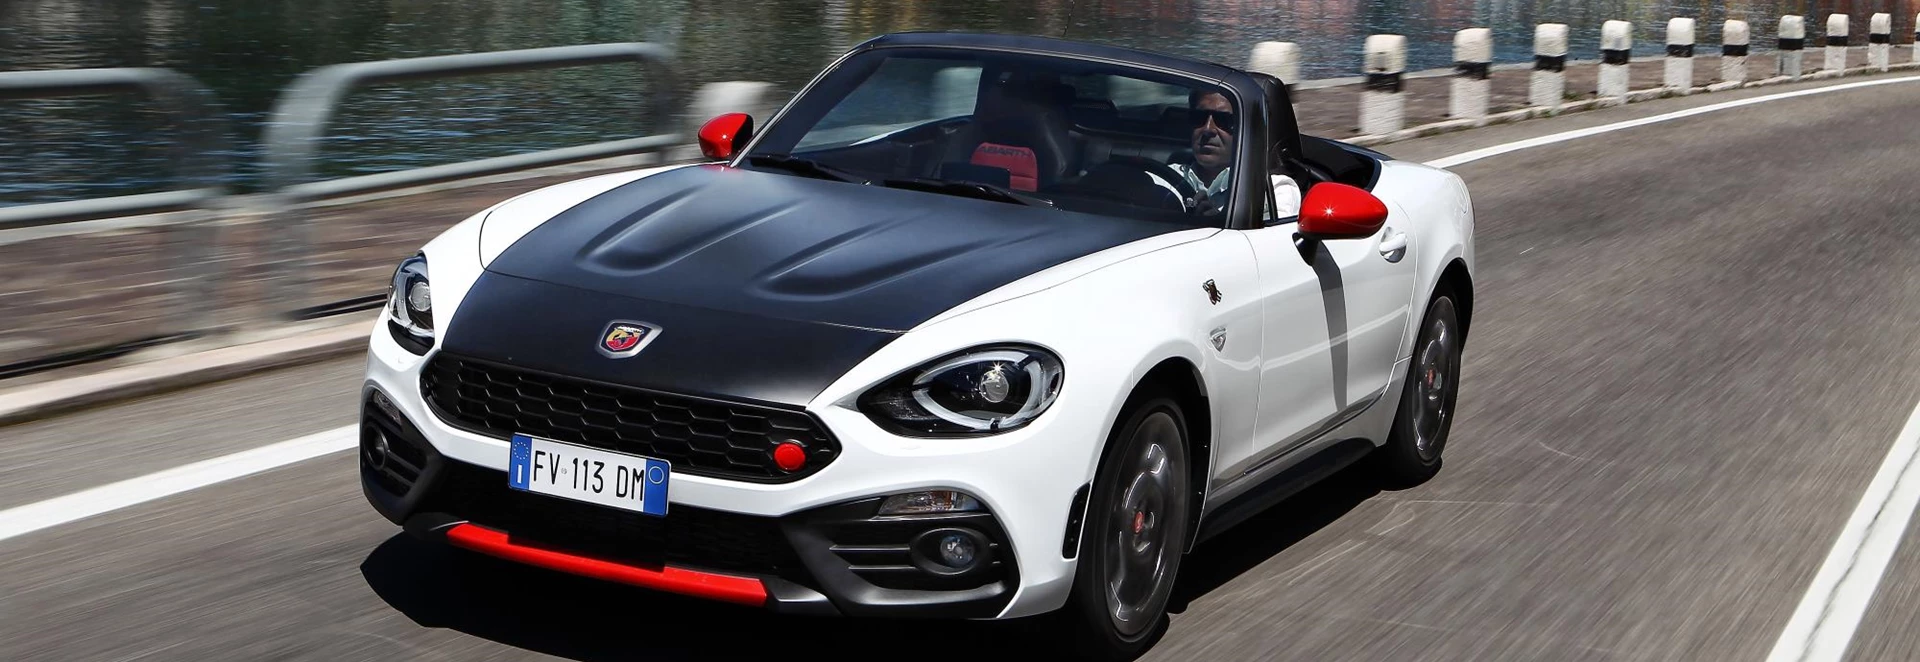 Abarth 124 Spider Convertible 2017 Review 